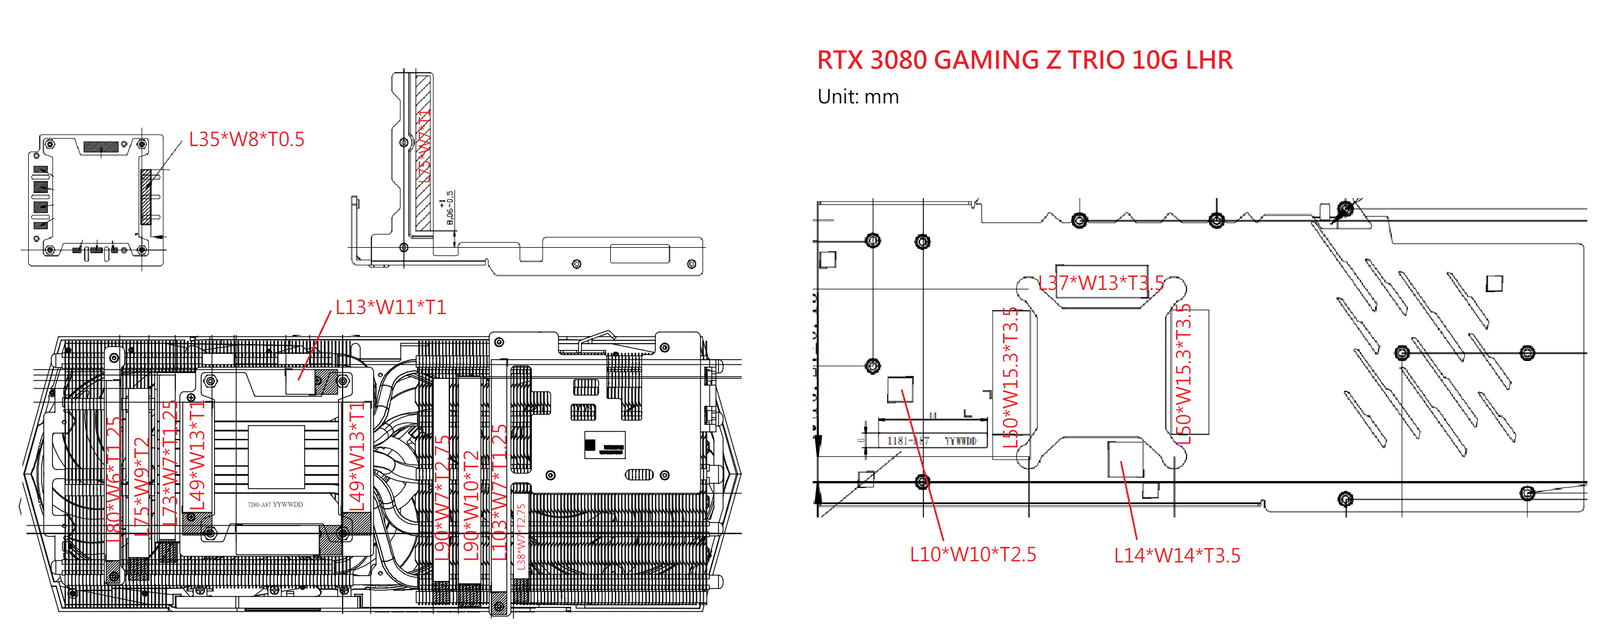 RTX 3080 GAMING Z TRIO 10G LHR.png